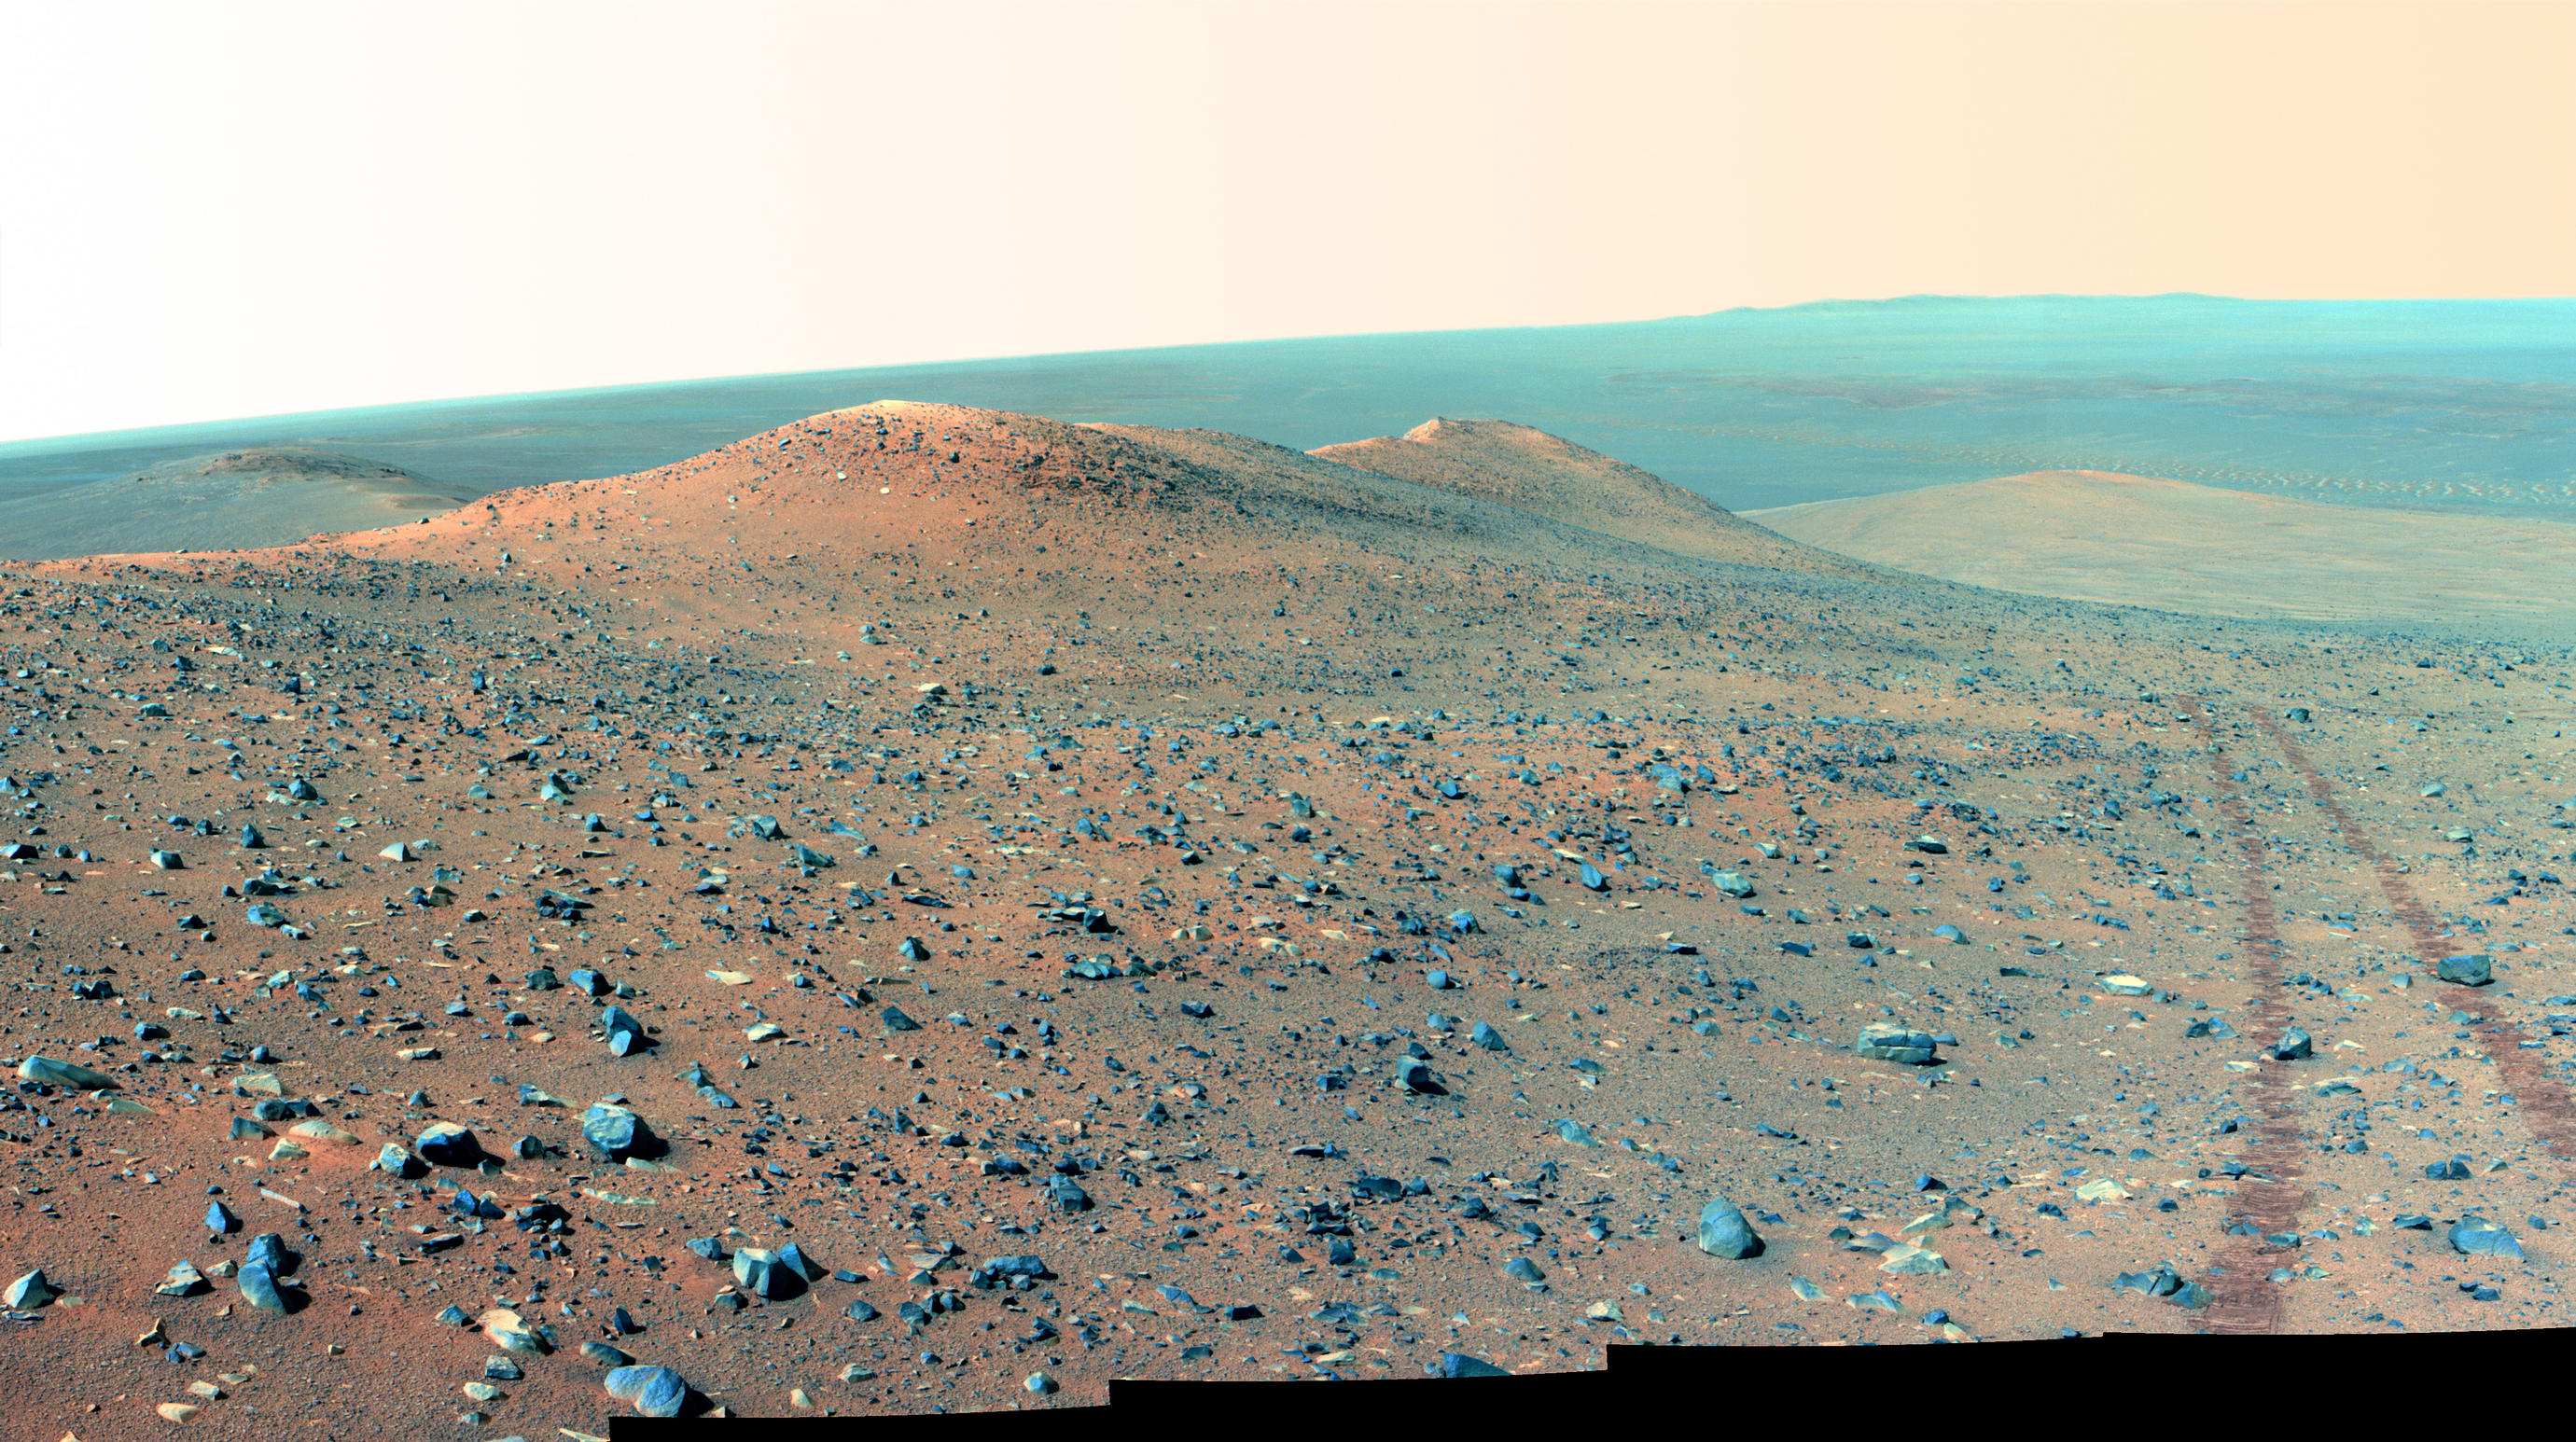 This north-looking vista from NASA's Mars Rover Opportunity shows Wdowiak Ridge, from left foreground to center. This version is presented in false color, which enhances visibility of the rover's wheel tracks at right.